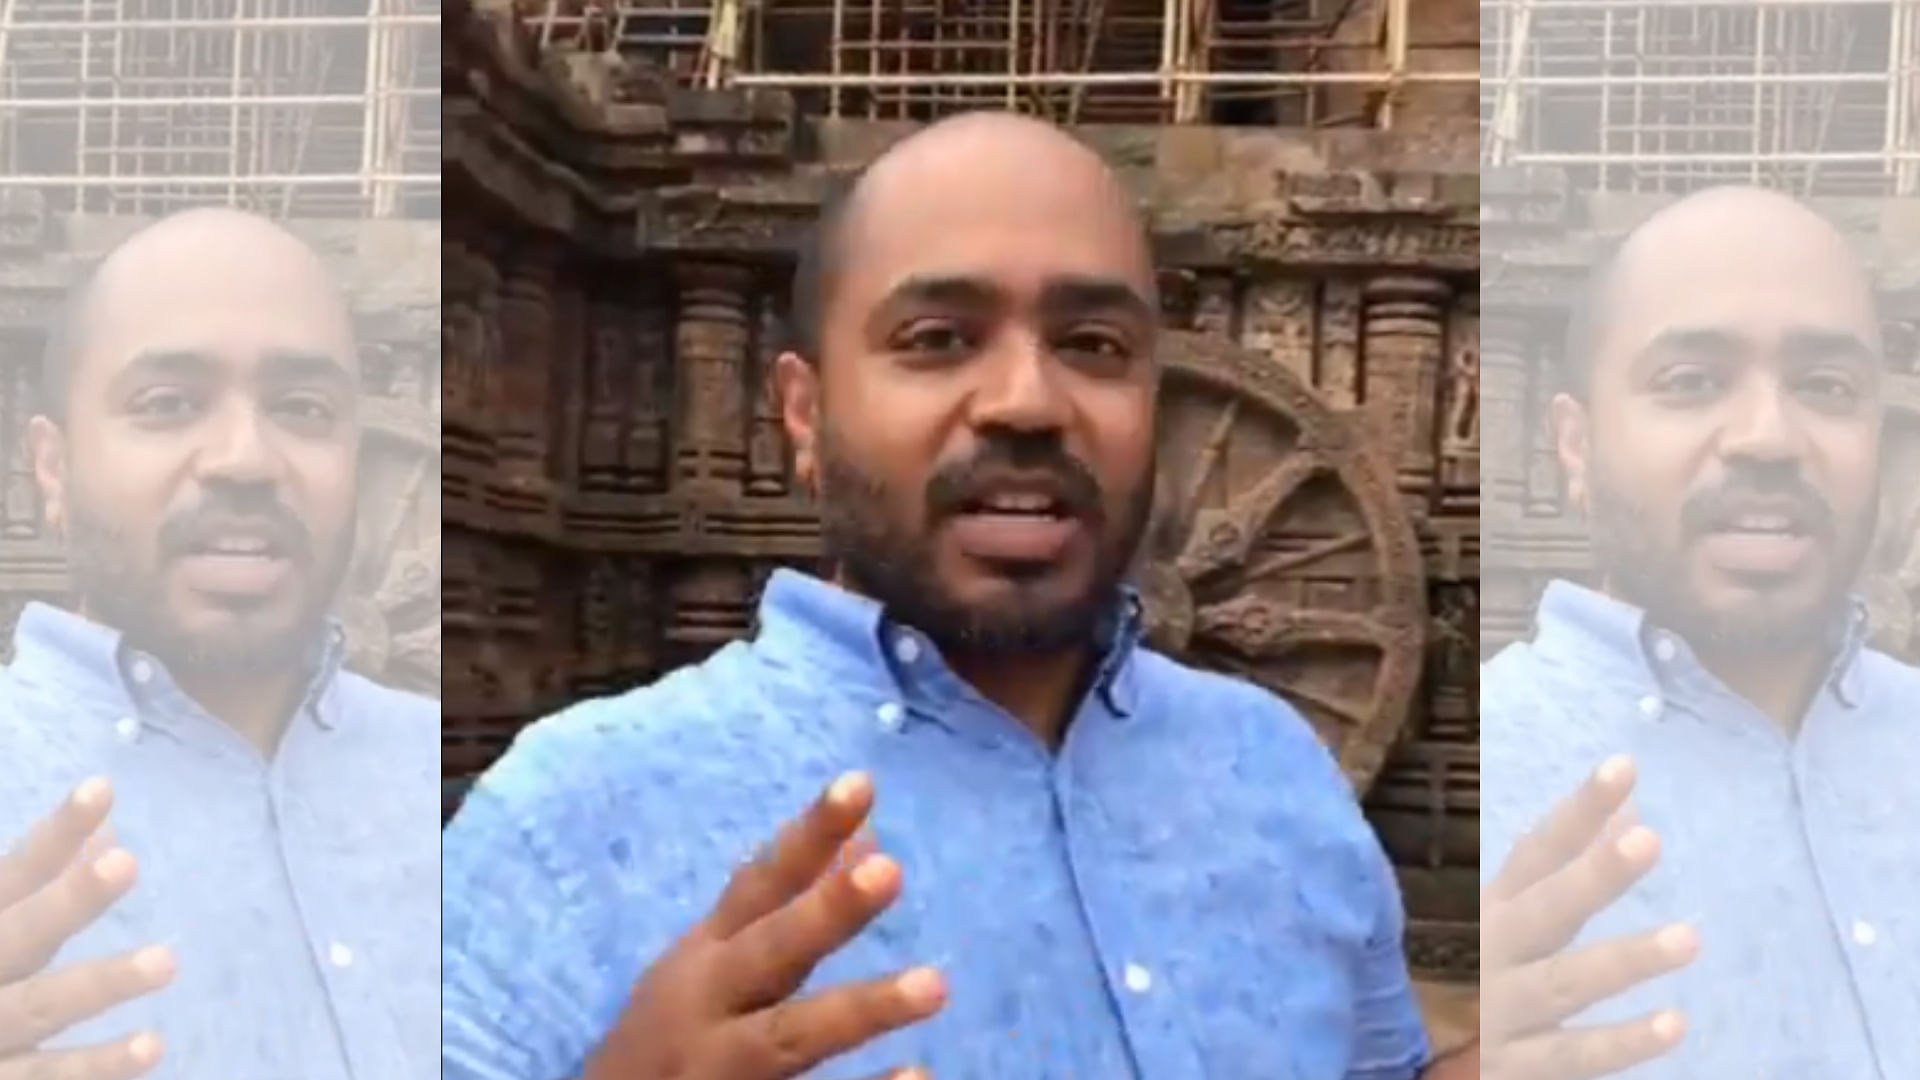 Delhi-based defence analyst Abhijit Iyer-Mitra was arrested in Bhubaneswar for his derogatory remarks on the history and culture of the state.